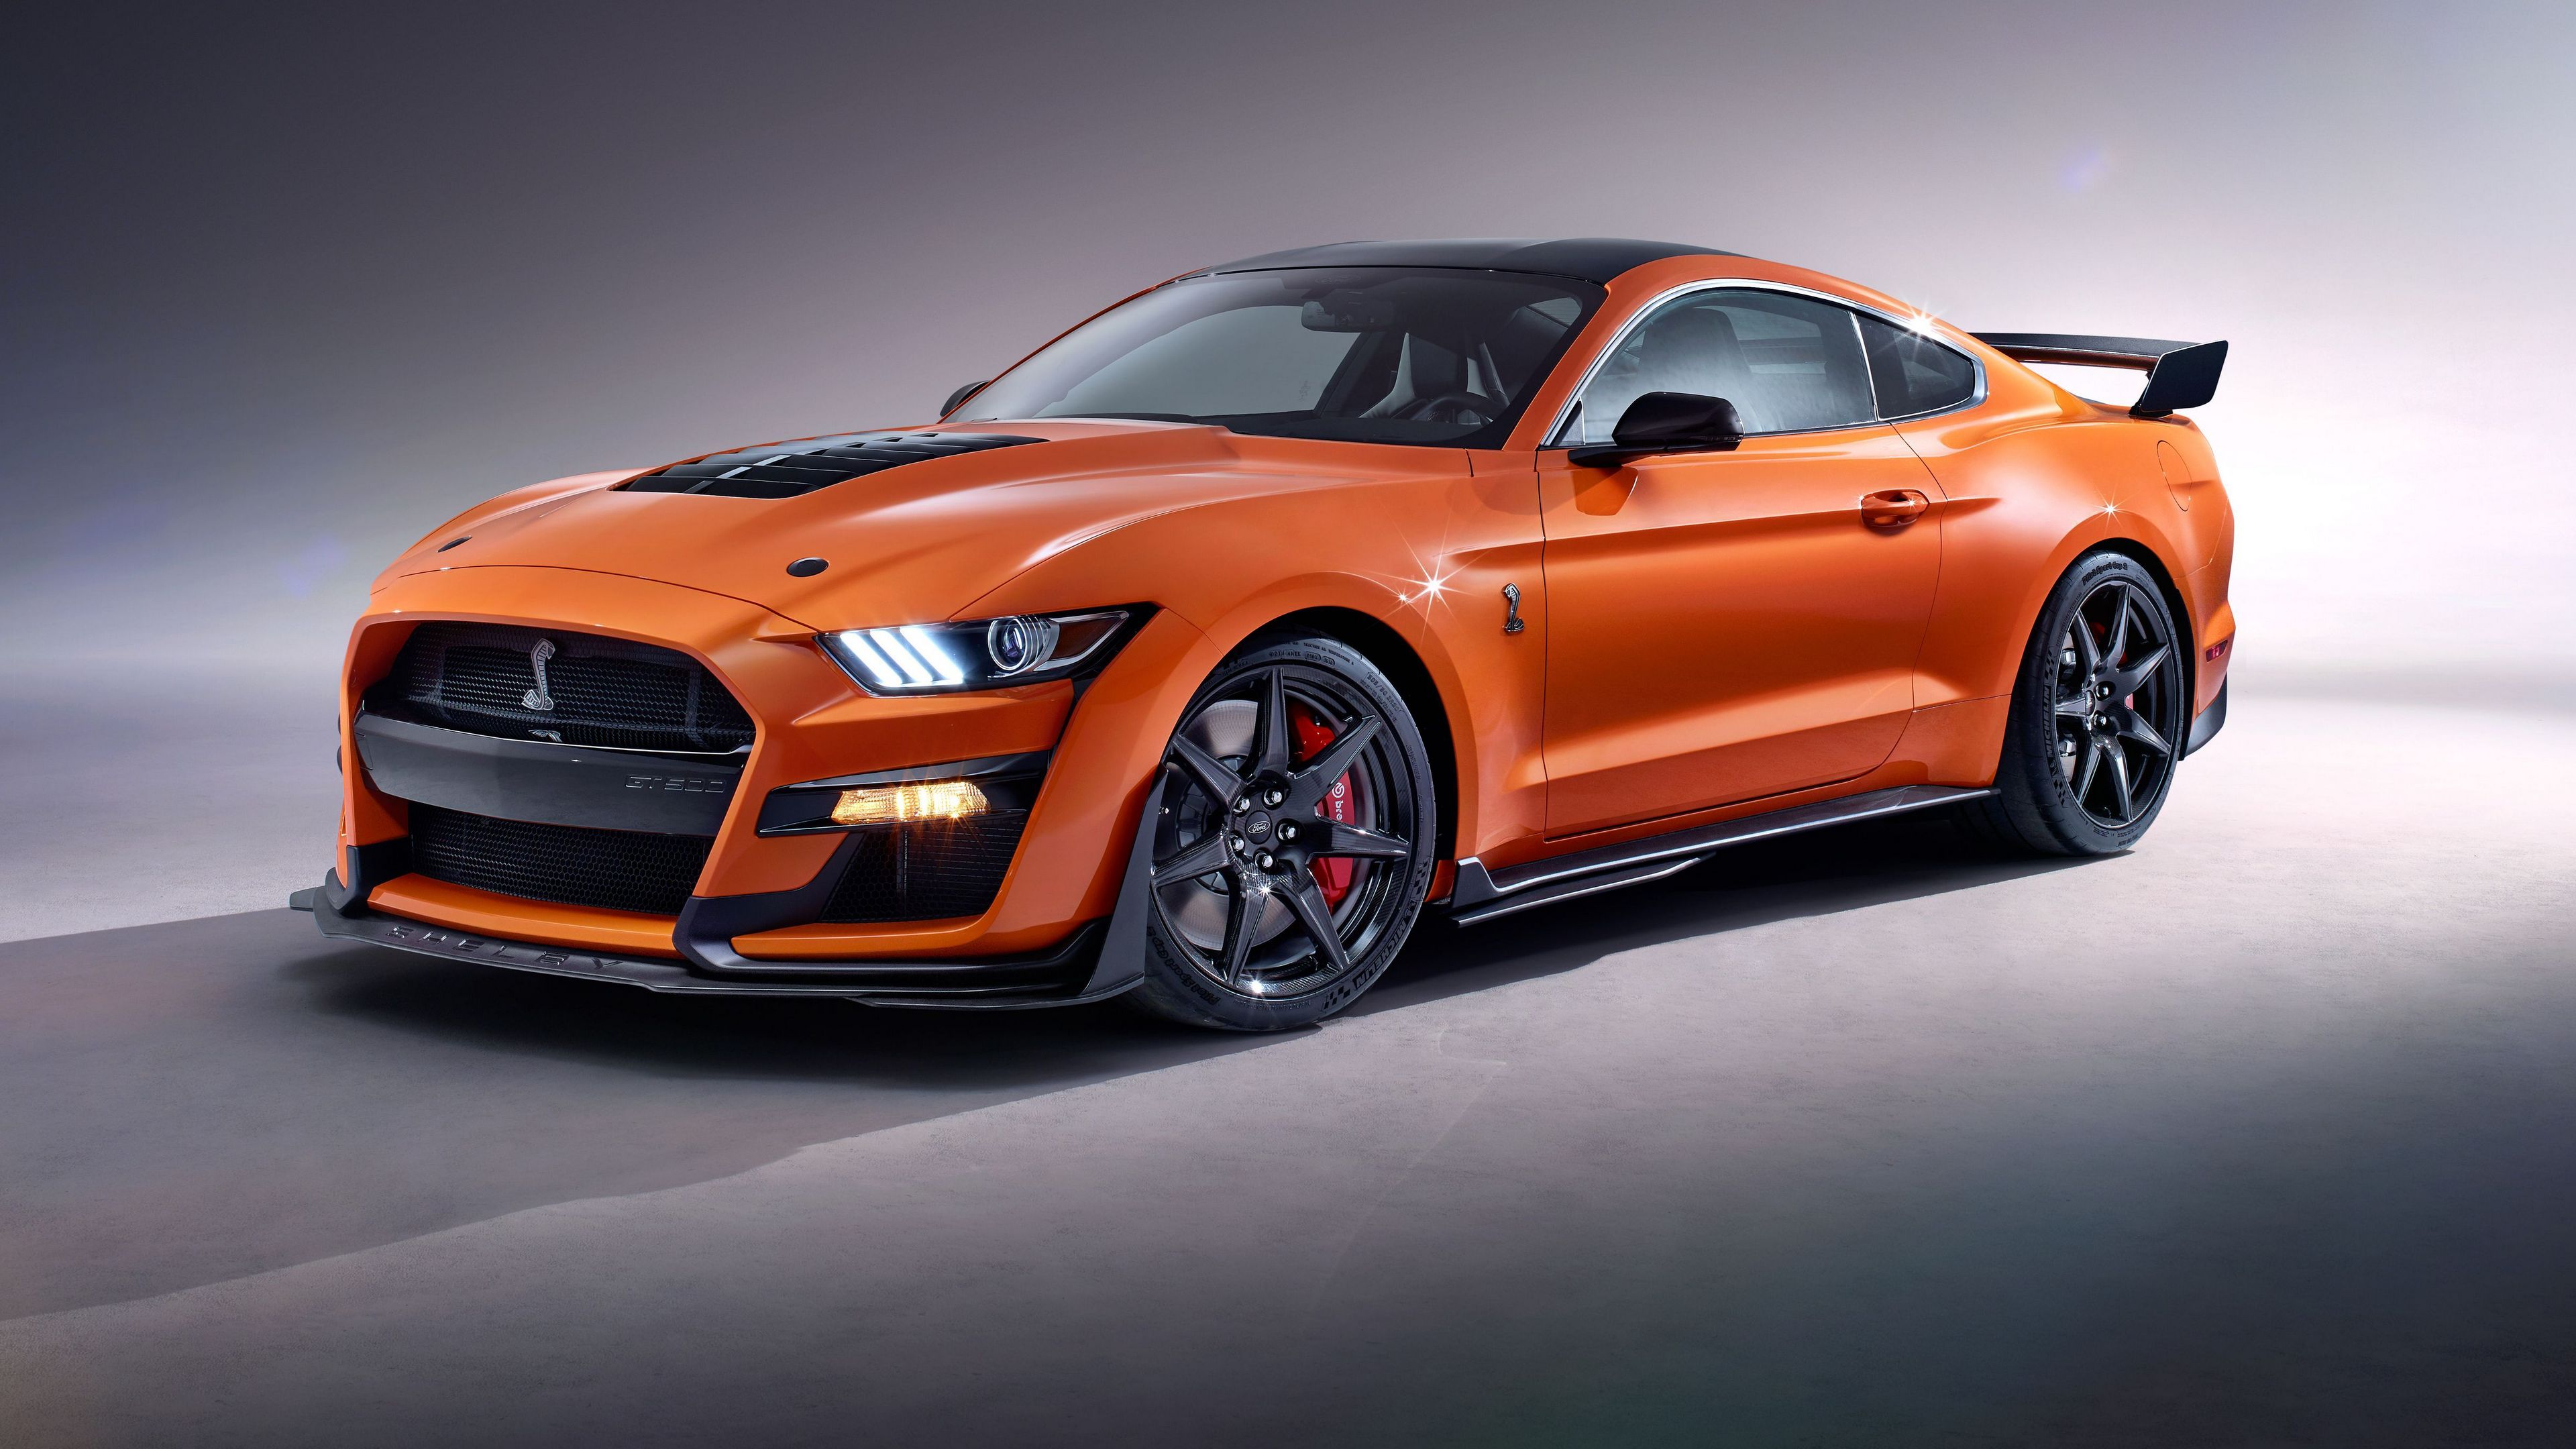 General 3840x2160 Ford Mustang Shelby Ford Mustang orange cars Ford vehicle Ford Mustang S550 muscle cars American cars Shelby simple background